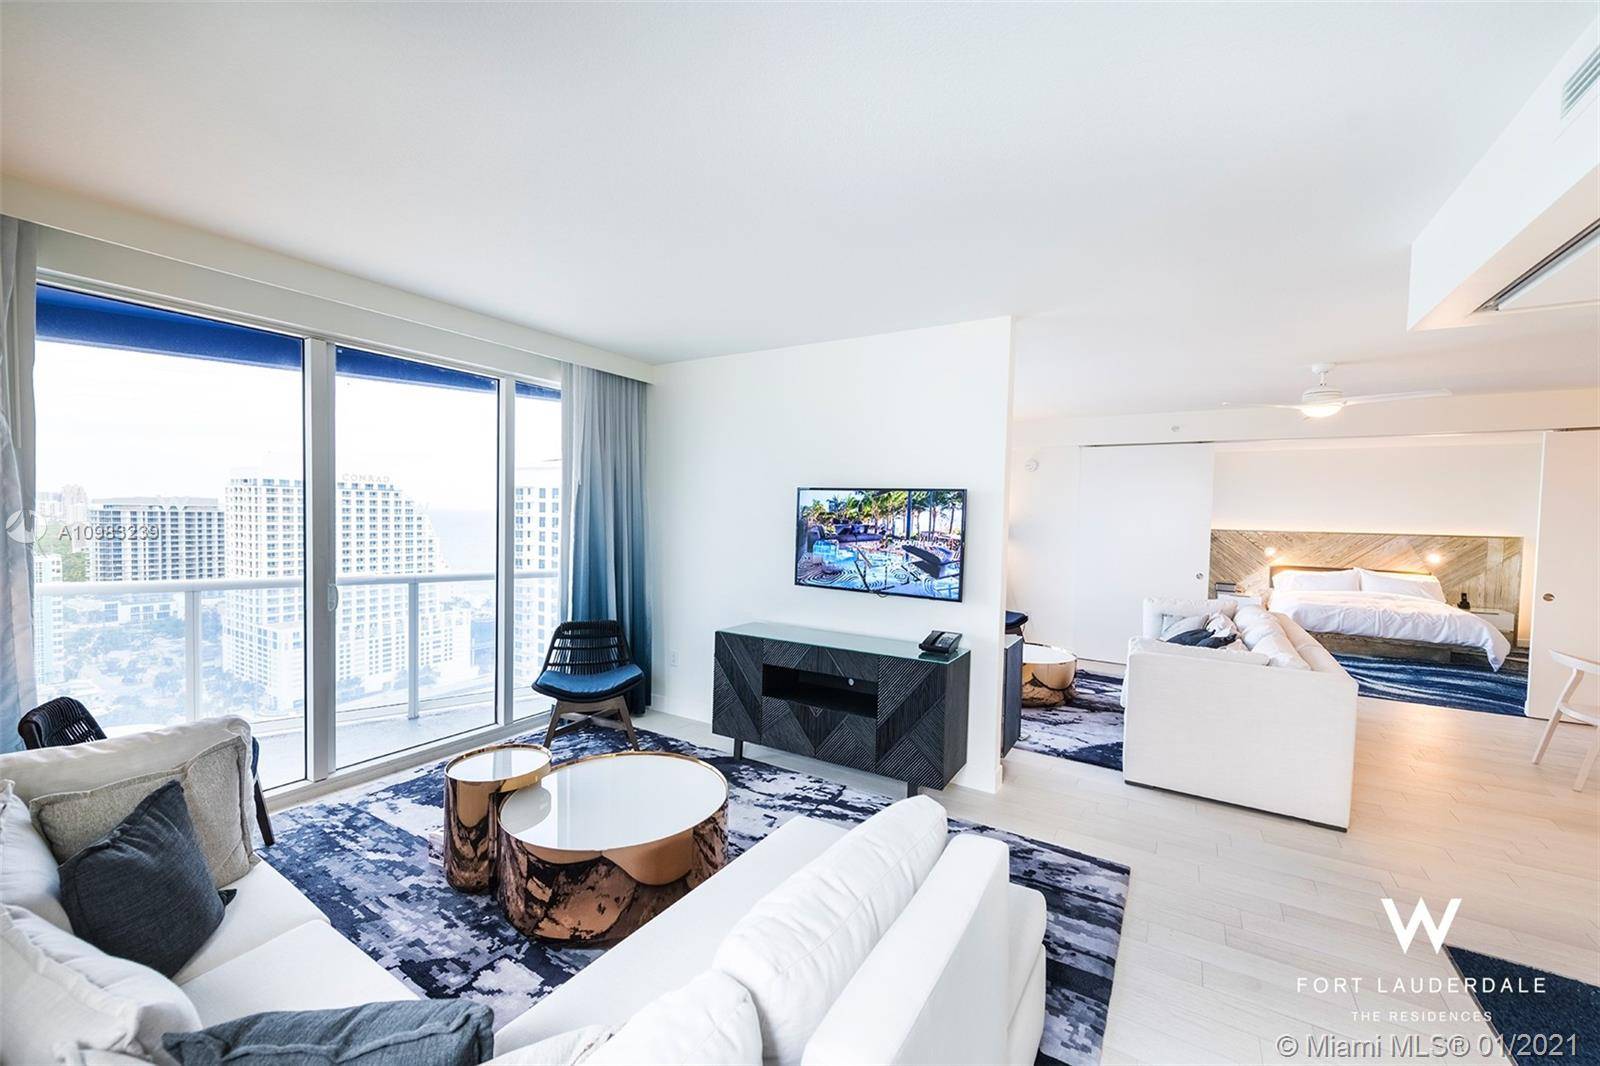 Fully furnished, beautifully decorated, move in ready 2 bedroom plus den 2 bathroom corner residence at the W Residences Fort Lauderdale.